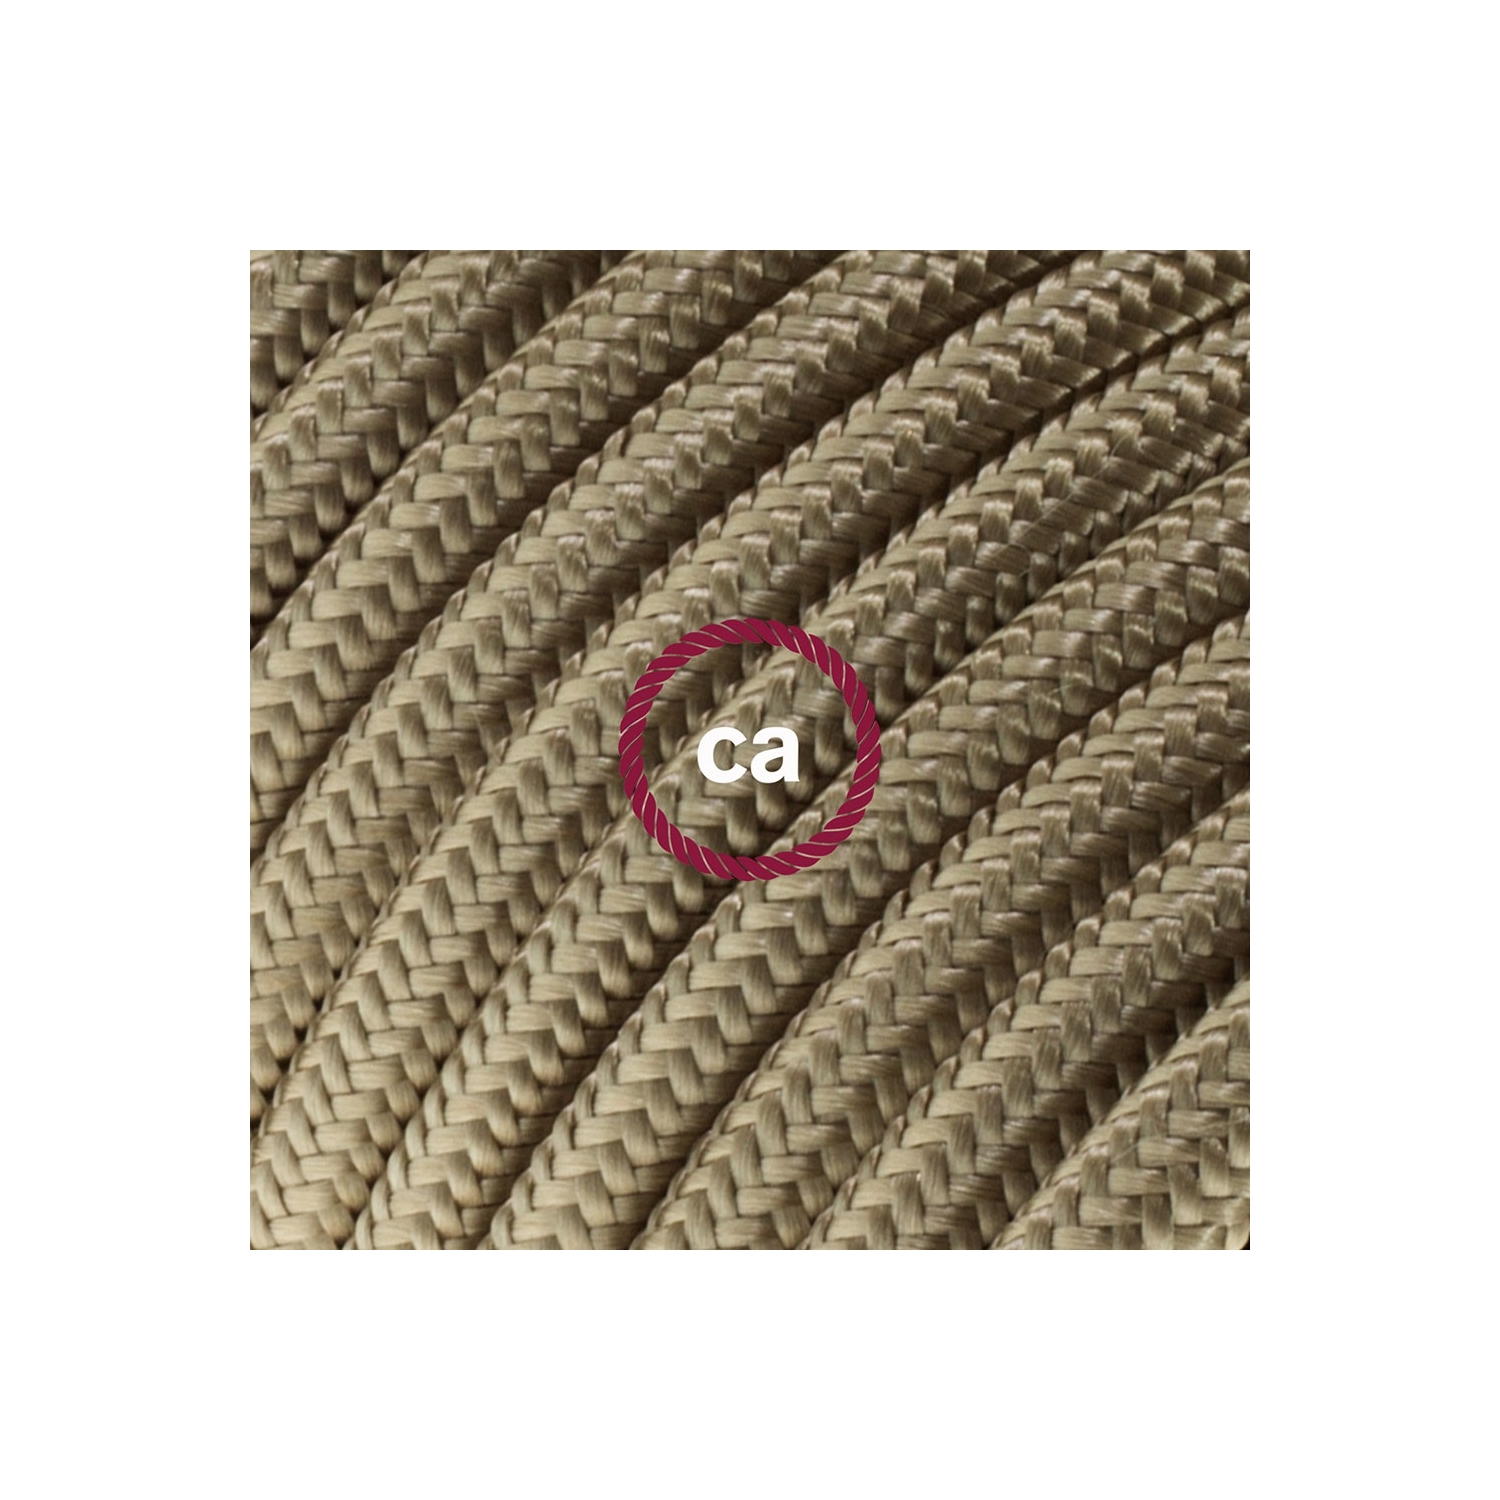 Cord-set - RM27 Cipria Rayon Covered Round Cable